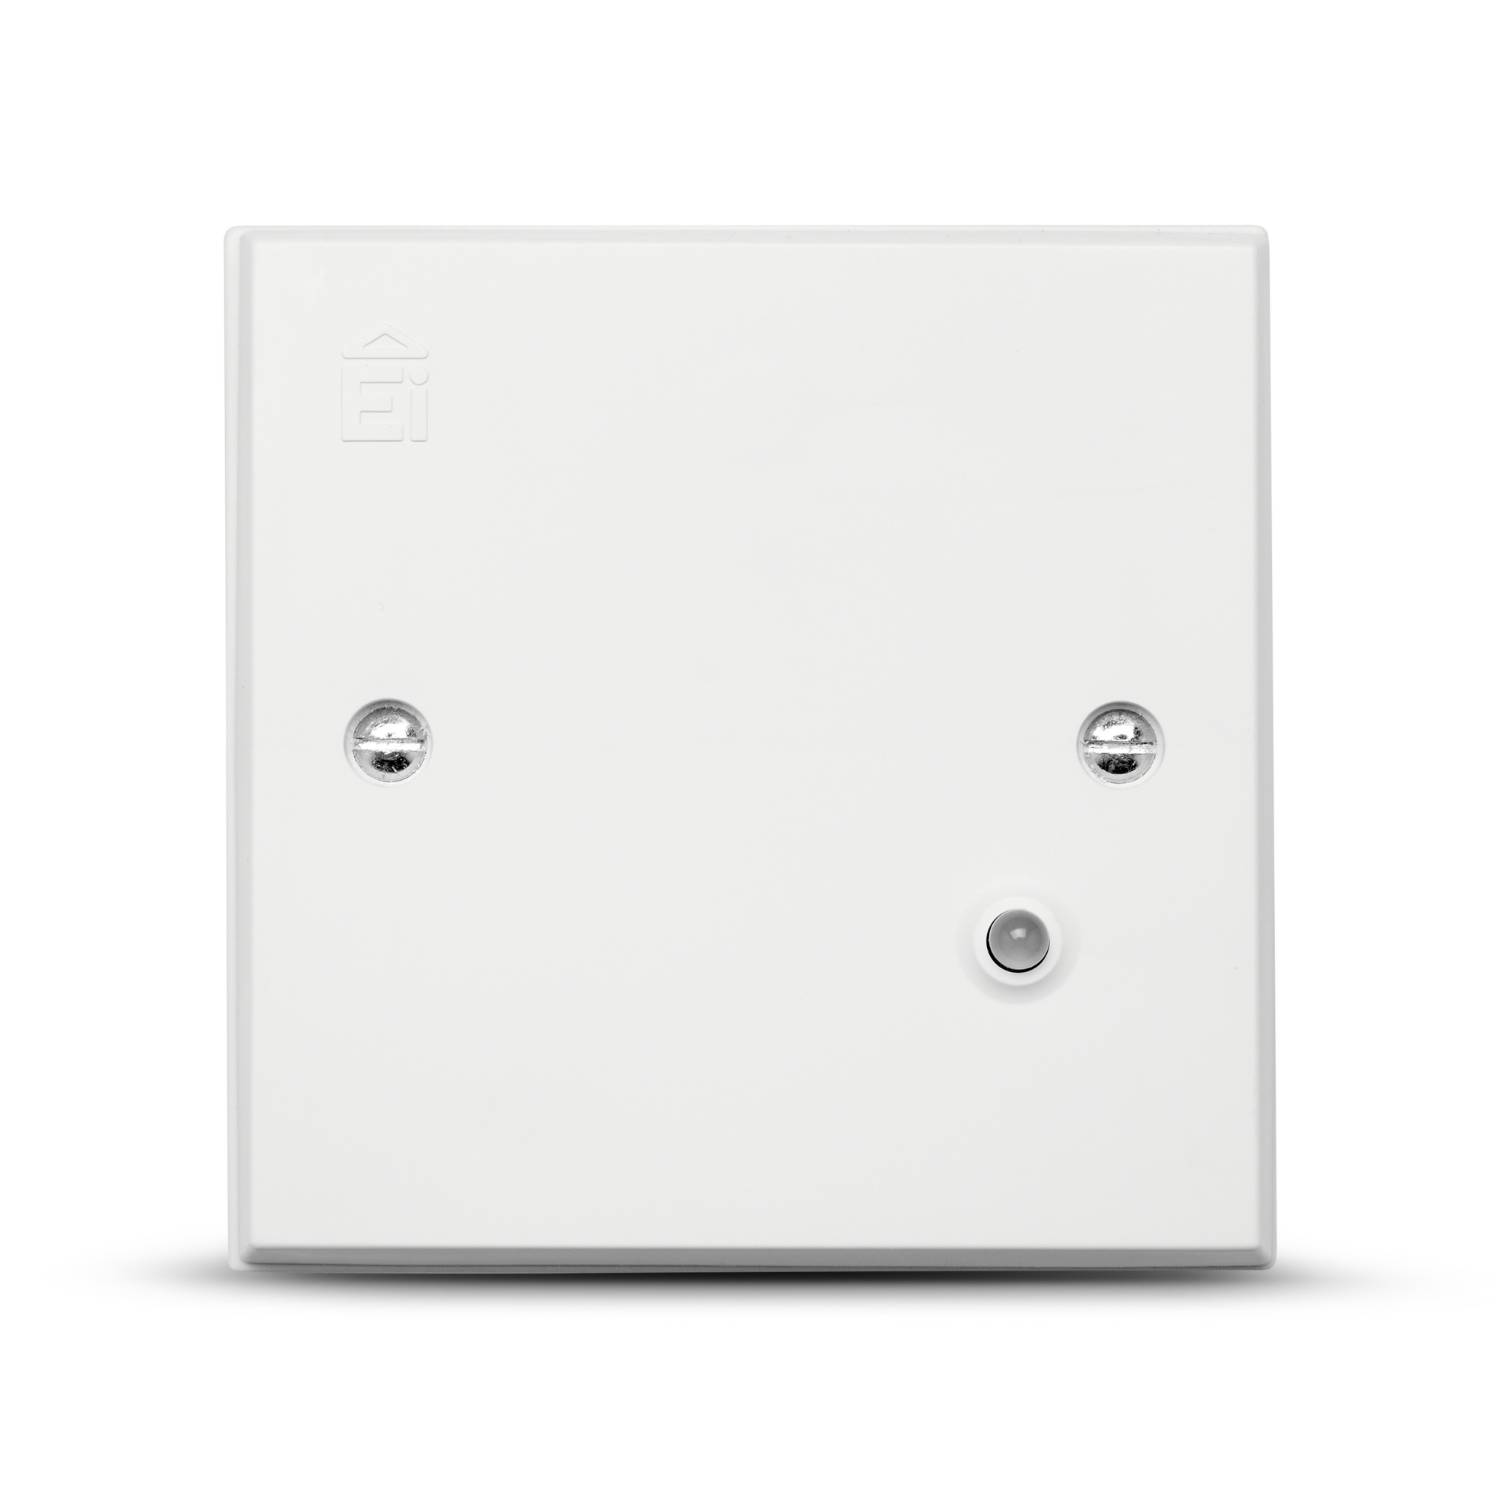 Ei408 RadioLINK Switched Input Module - Switched Input Module